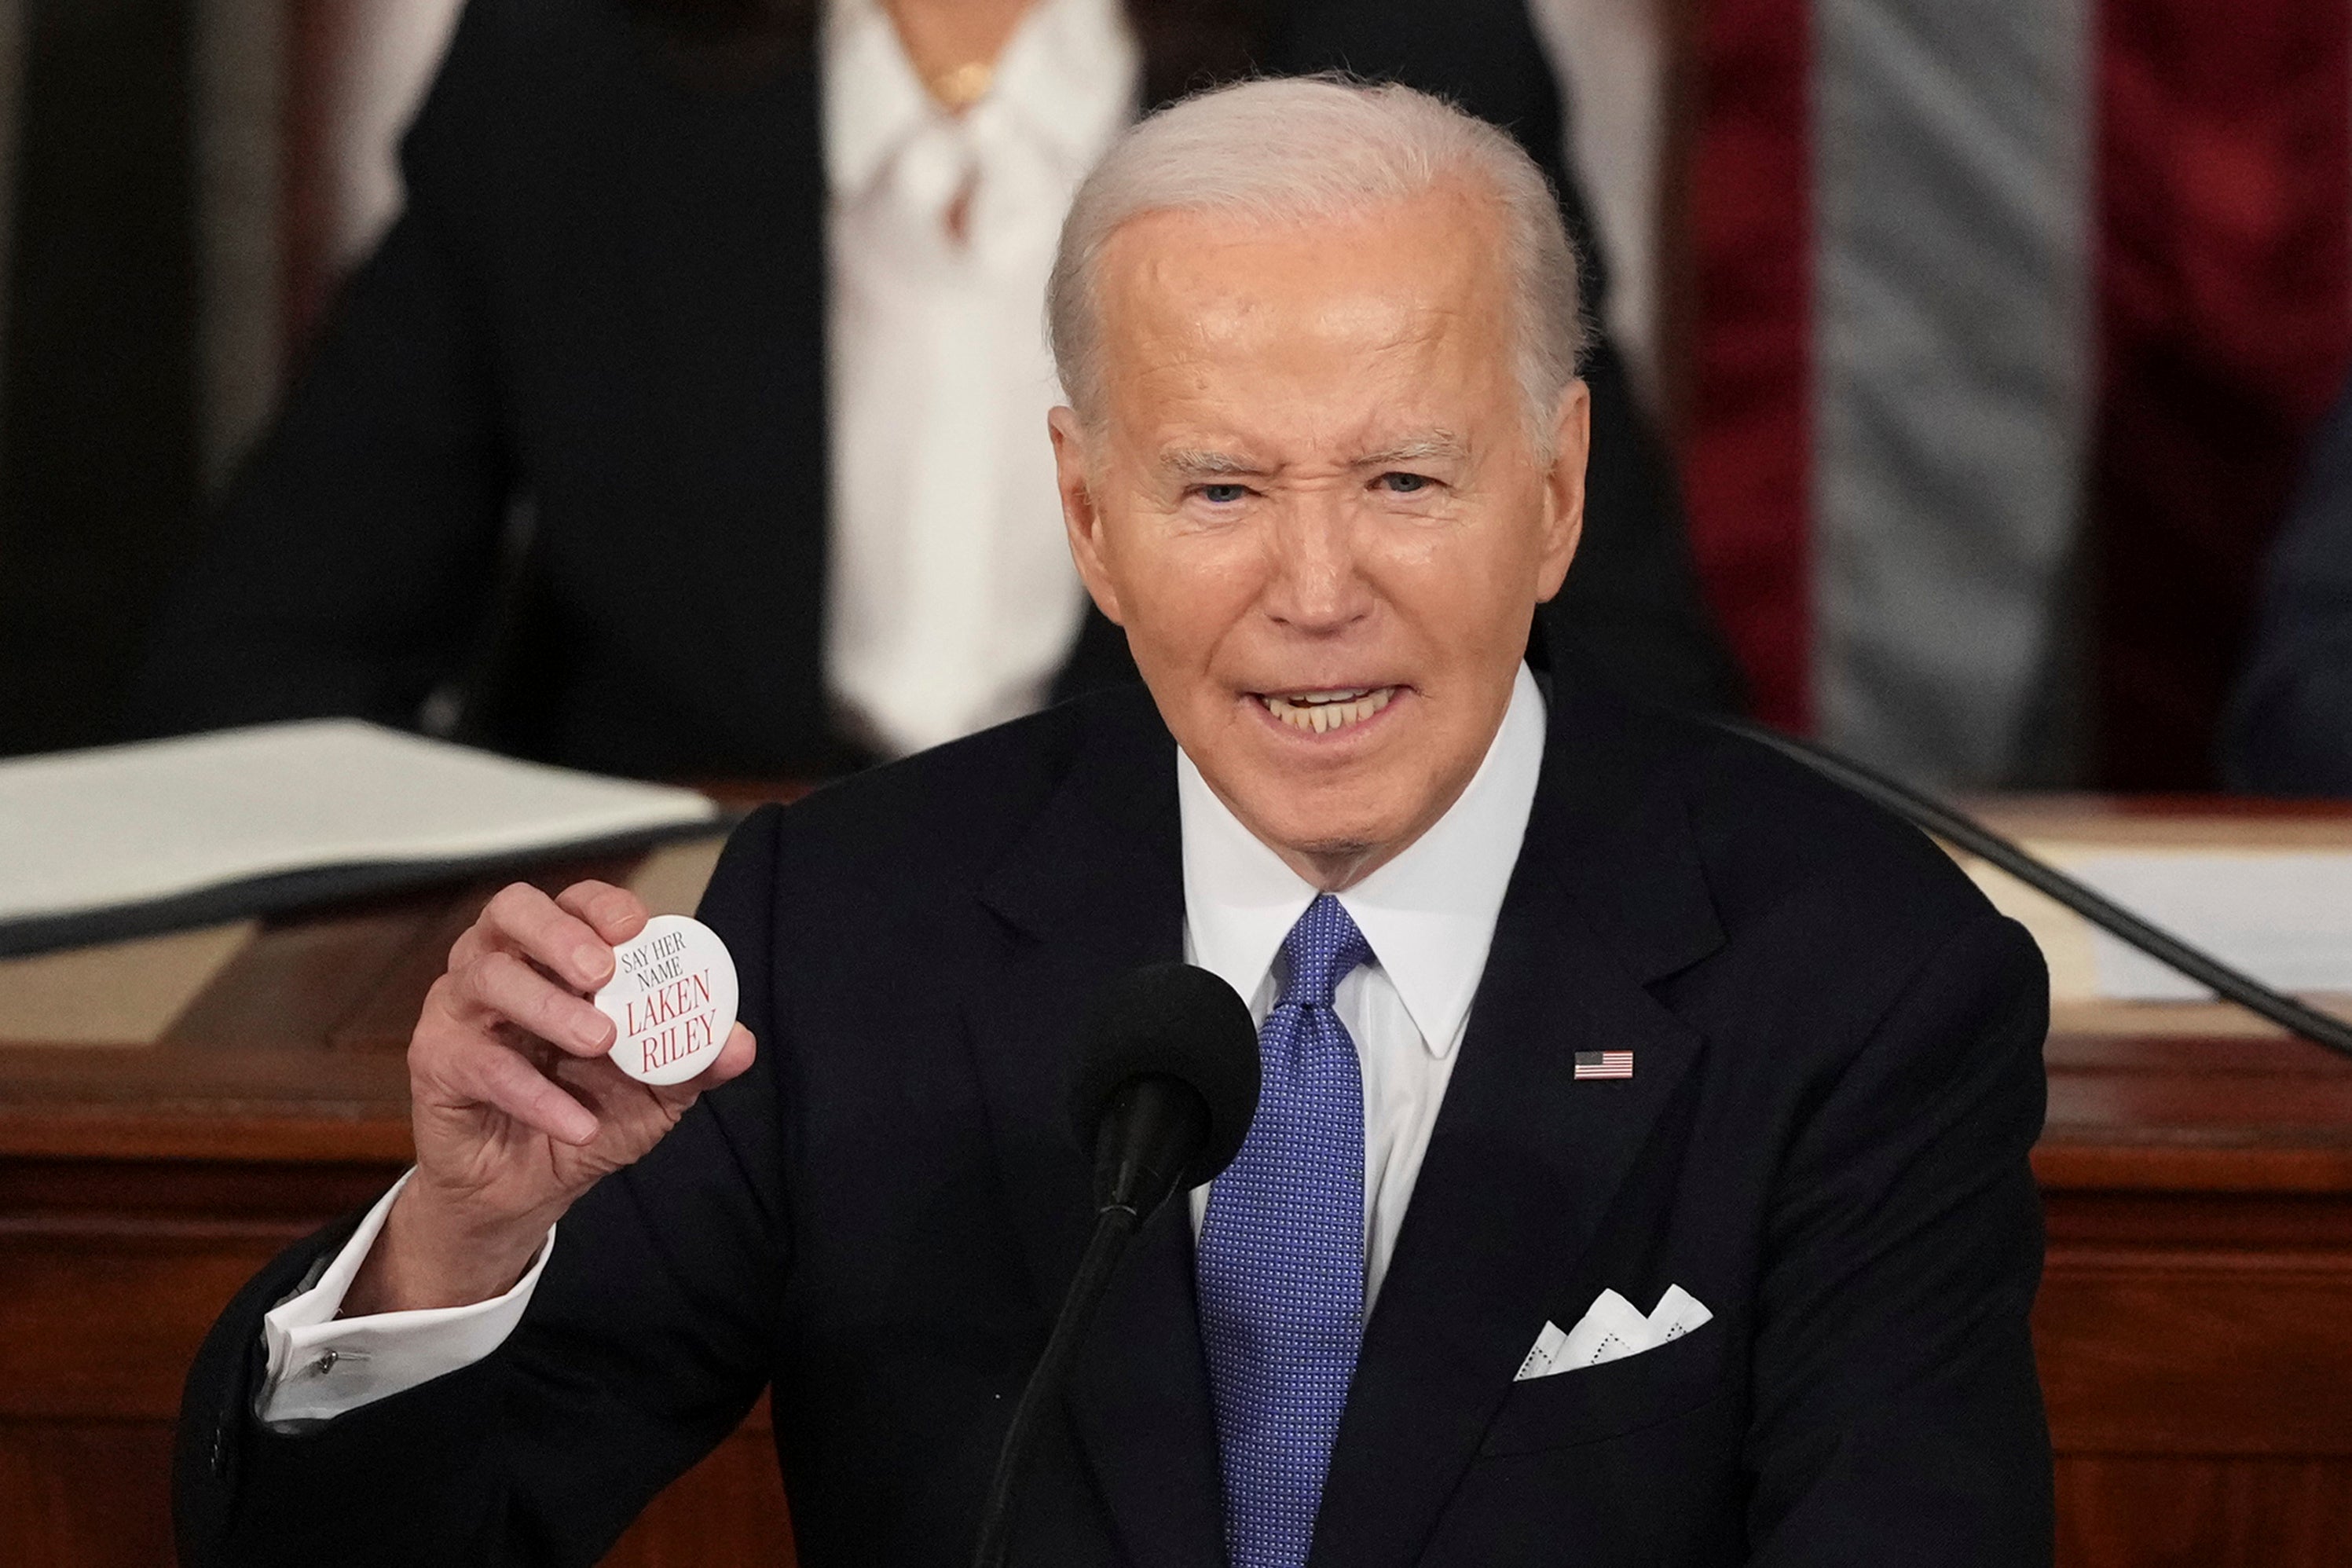 President Joe Biden holds a pin with the name of Laken Riley, a Georgia woman who was allegedly killed by a Venezuelan man. Republicans have used her her death to push for plans to militarize the US-Mexico border